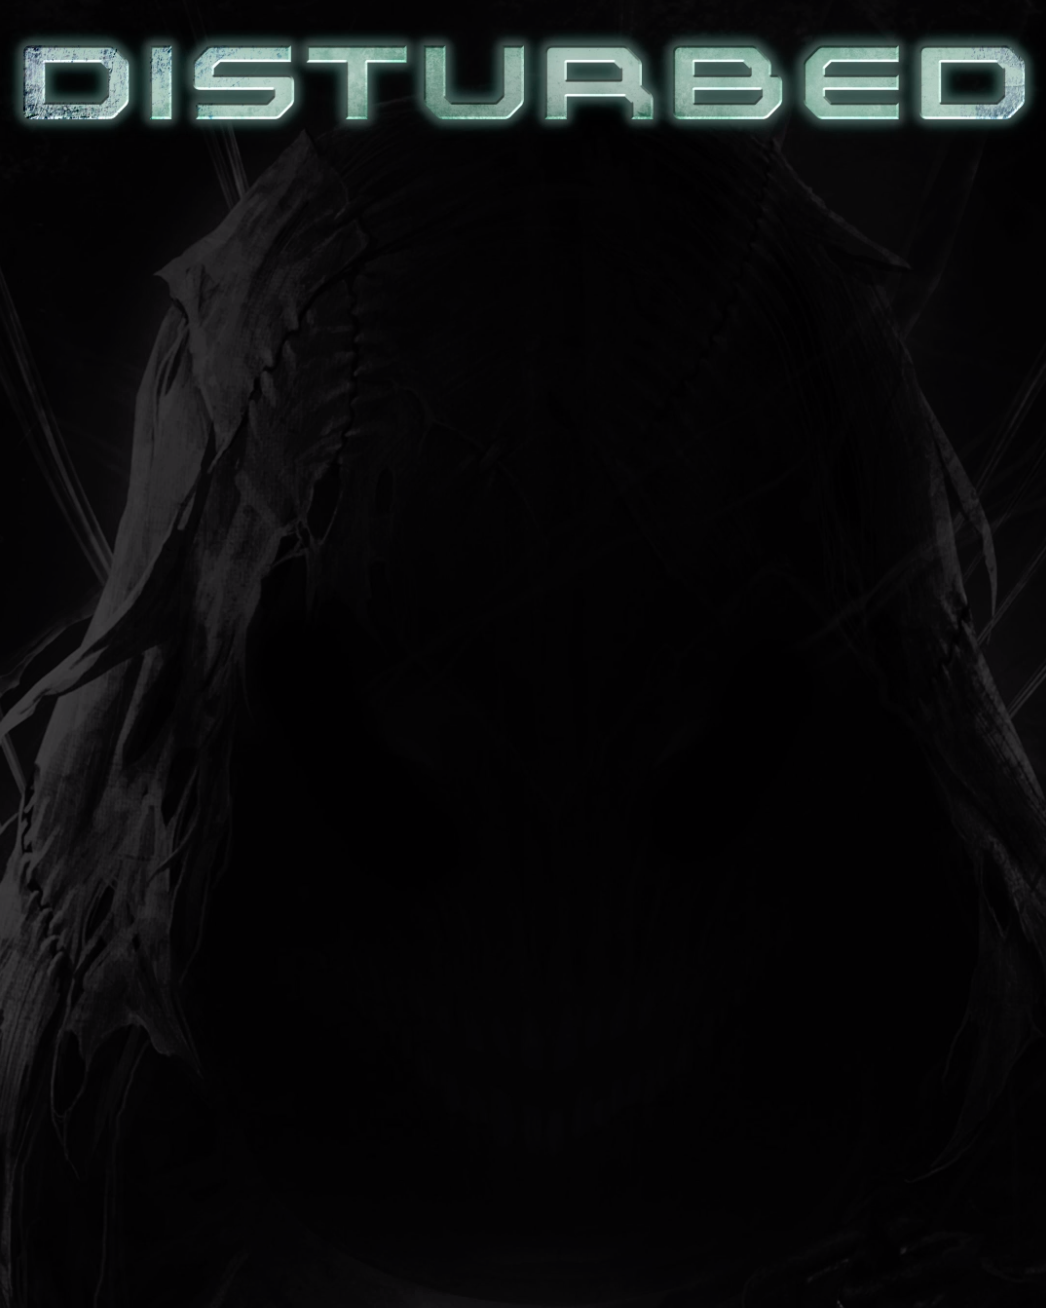 New music tease graphic from Disturbed featuring a silhouette of The Guy